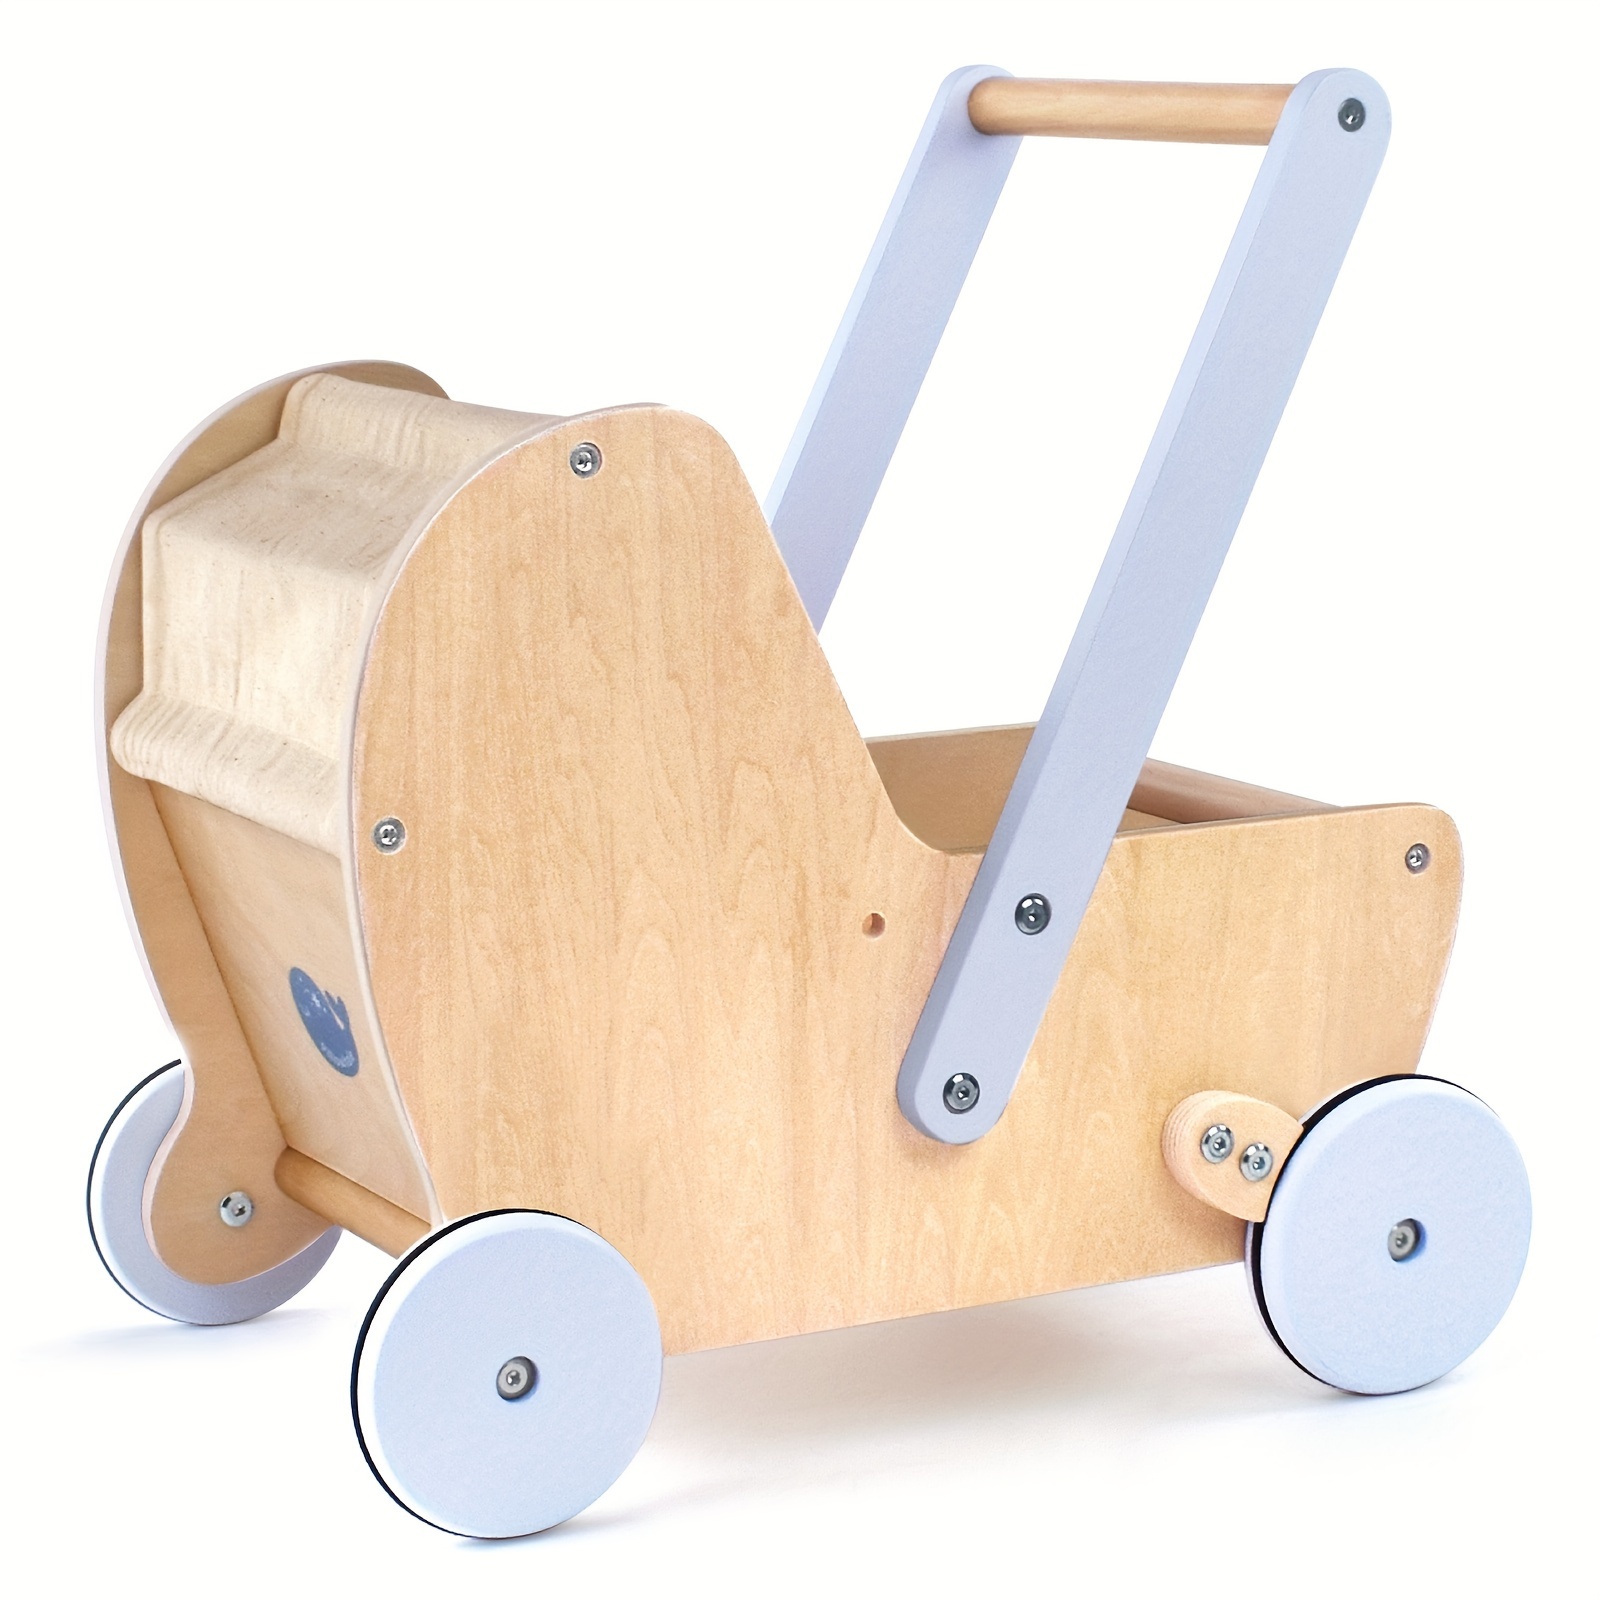 

Wooden Baby Doll Pram Stroller, Wooden Baby Walker Push And Pull Doll Stroller, Baby Wooden Toy Stroller For Toddler Boys Girls 18 Months And Up